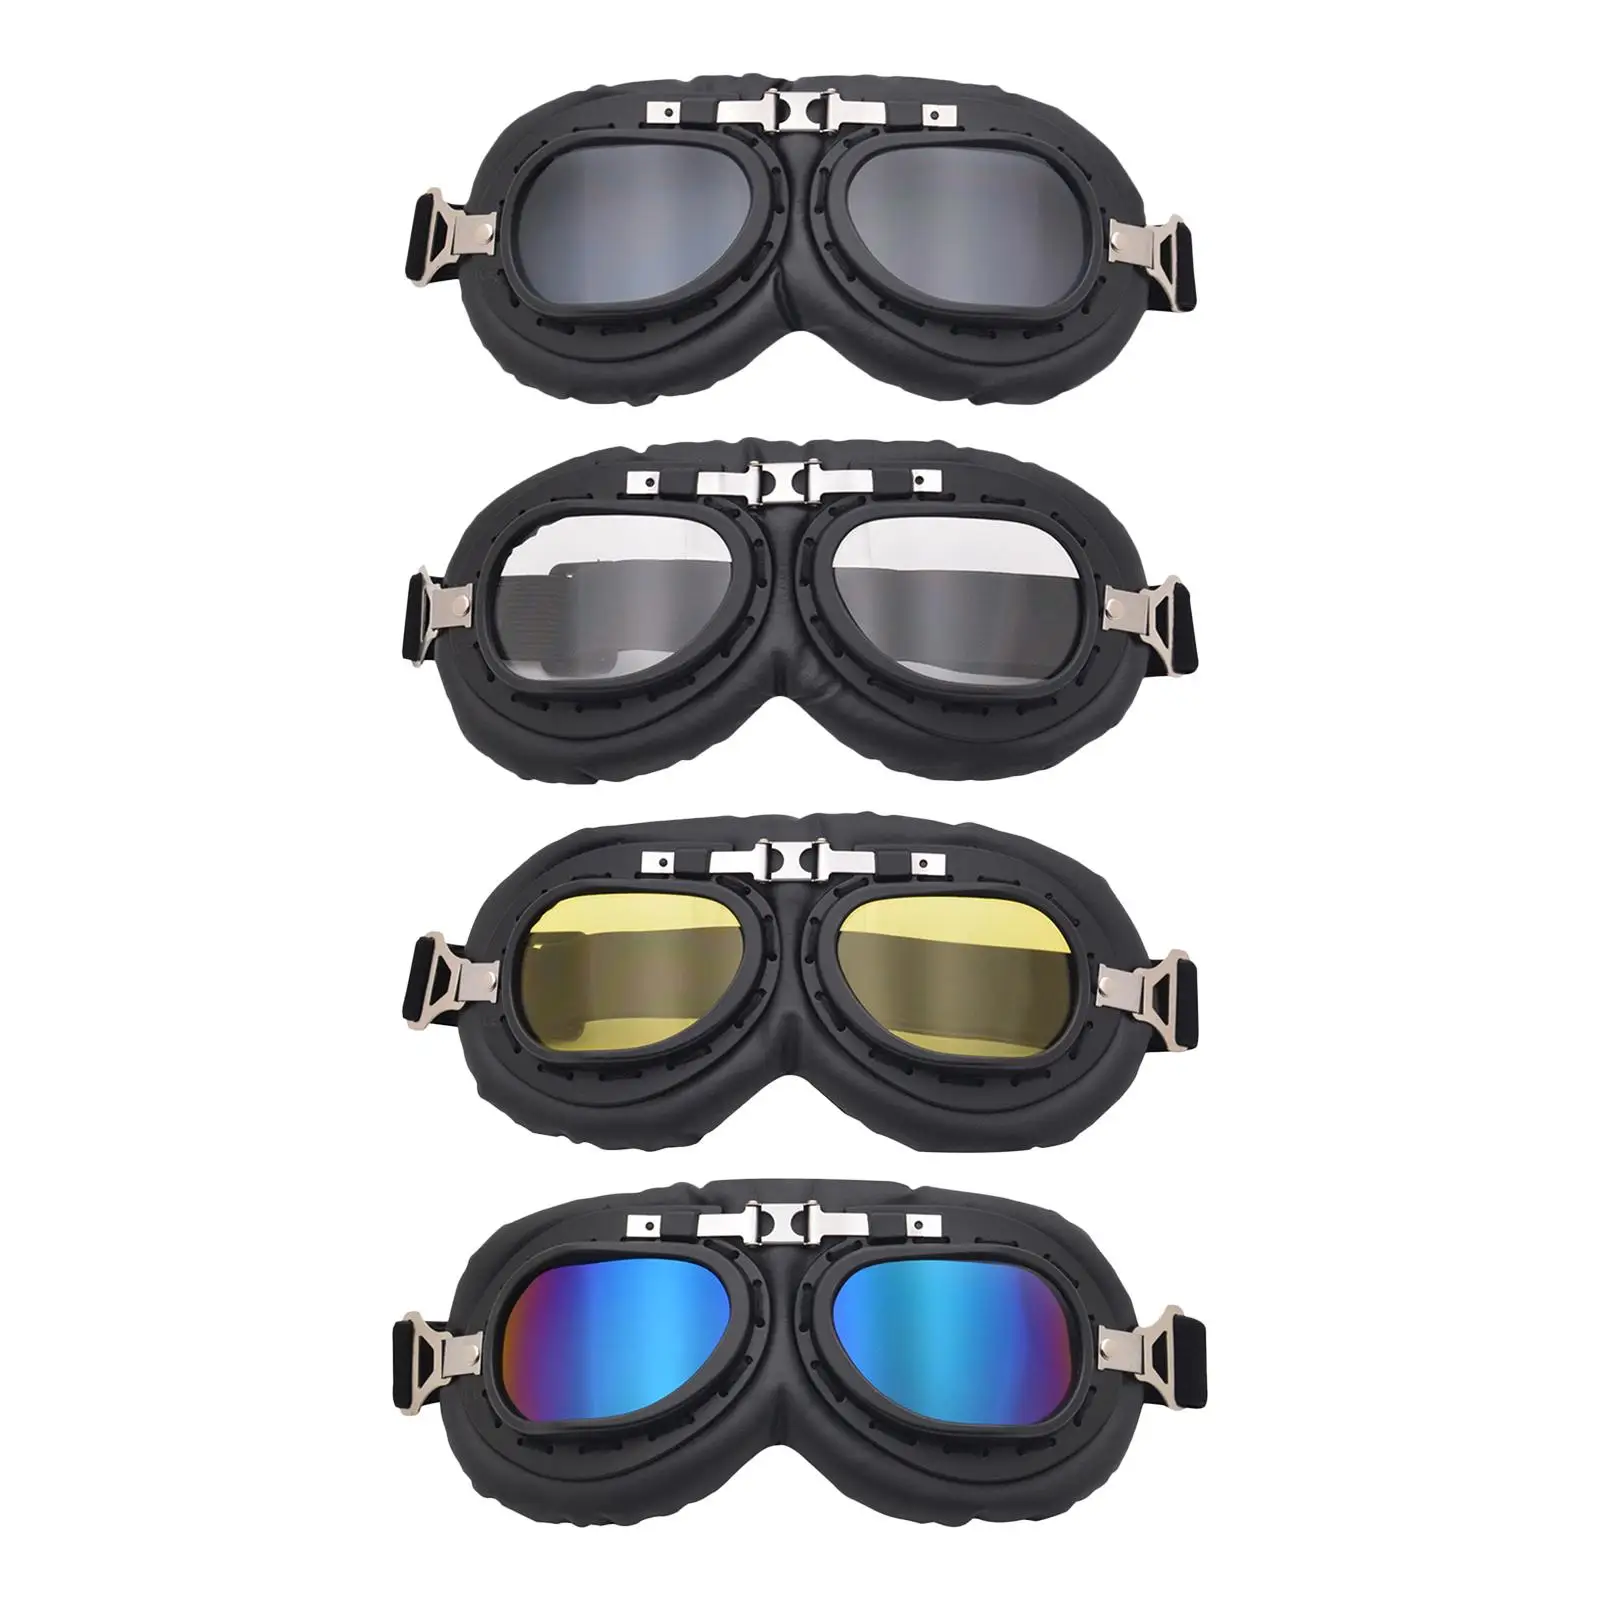 2Pcs Motorcycle Goggles Anti Scratch Dust Proof for Touring Riding ATV